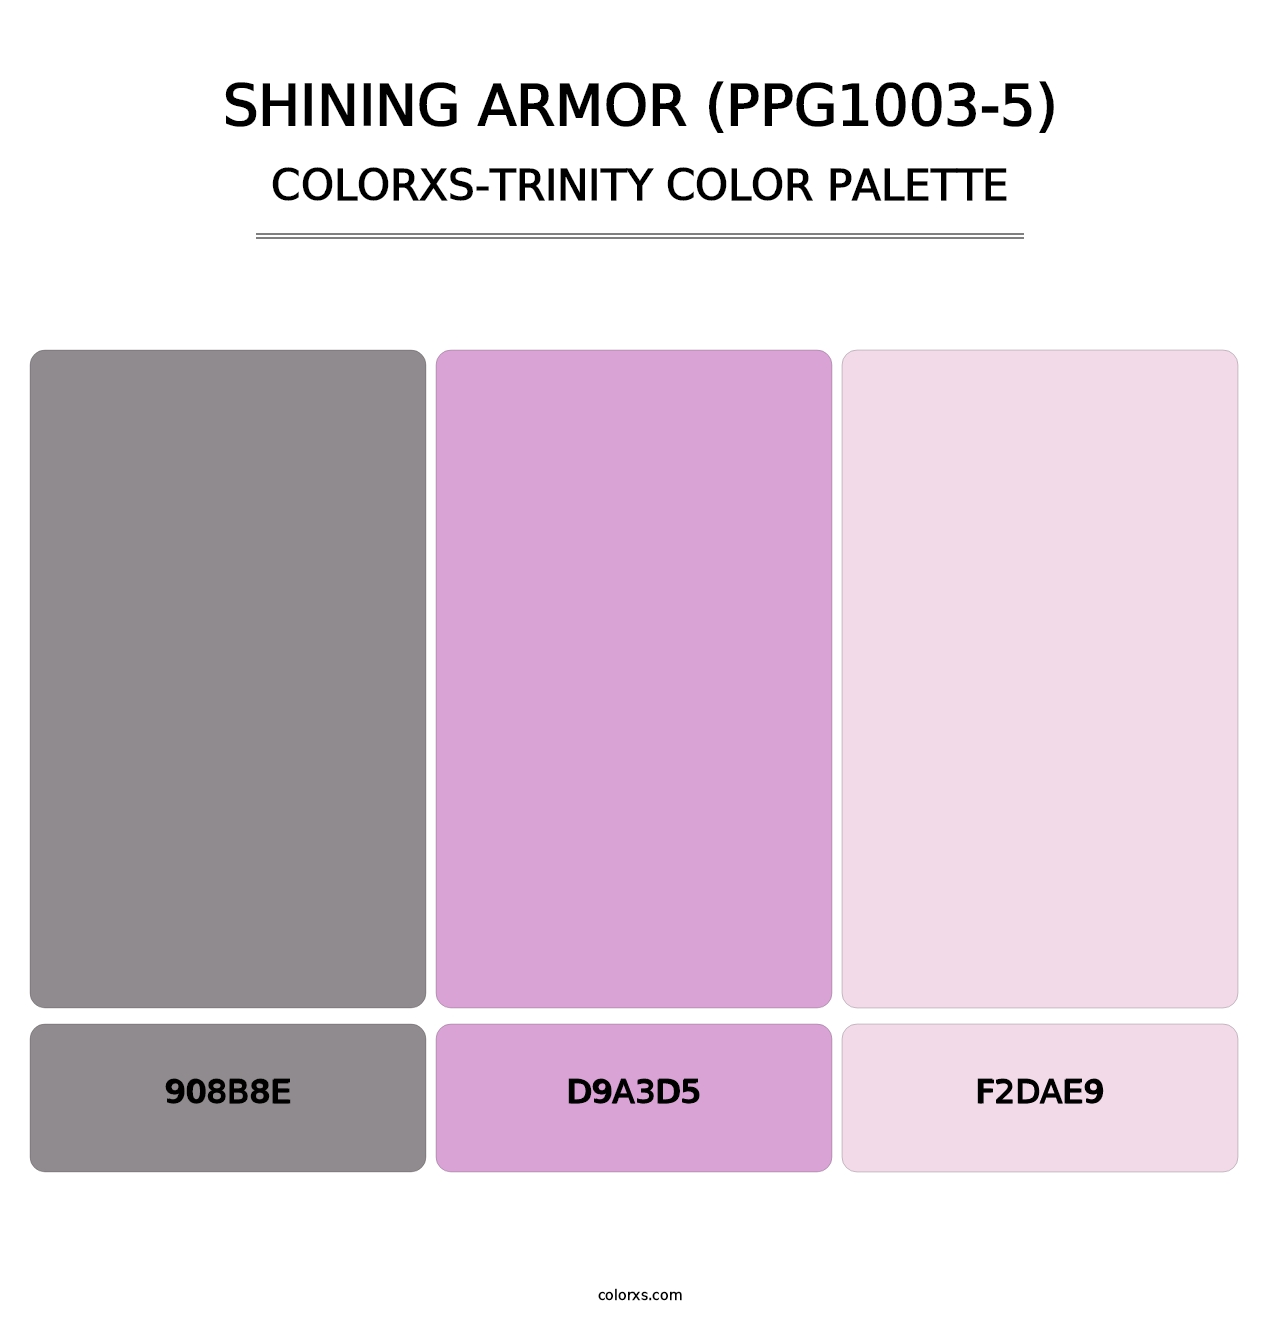 Shining Armor (PPG1003-5) - Colorxs Trinity Palette